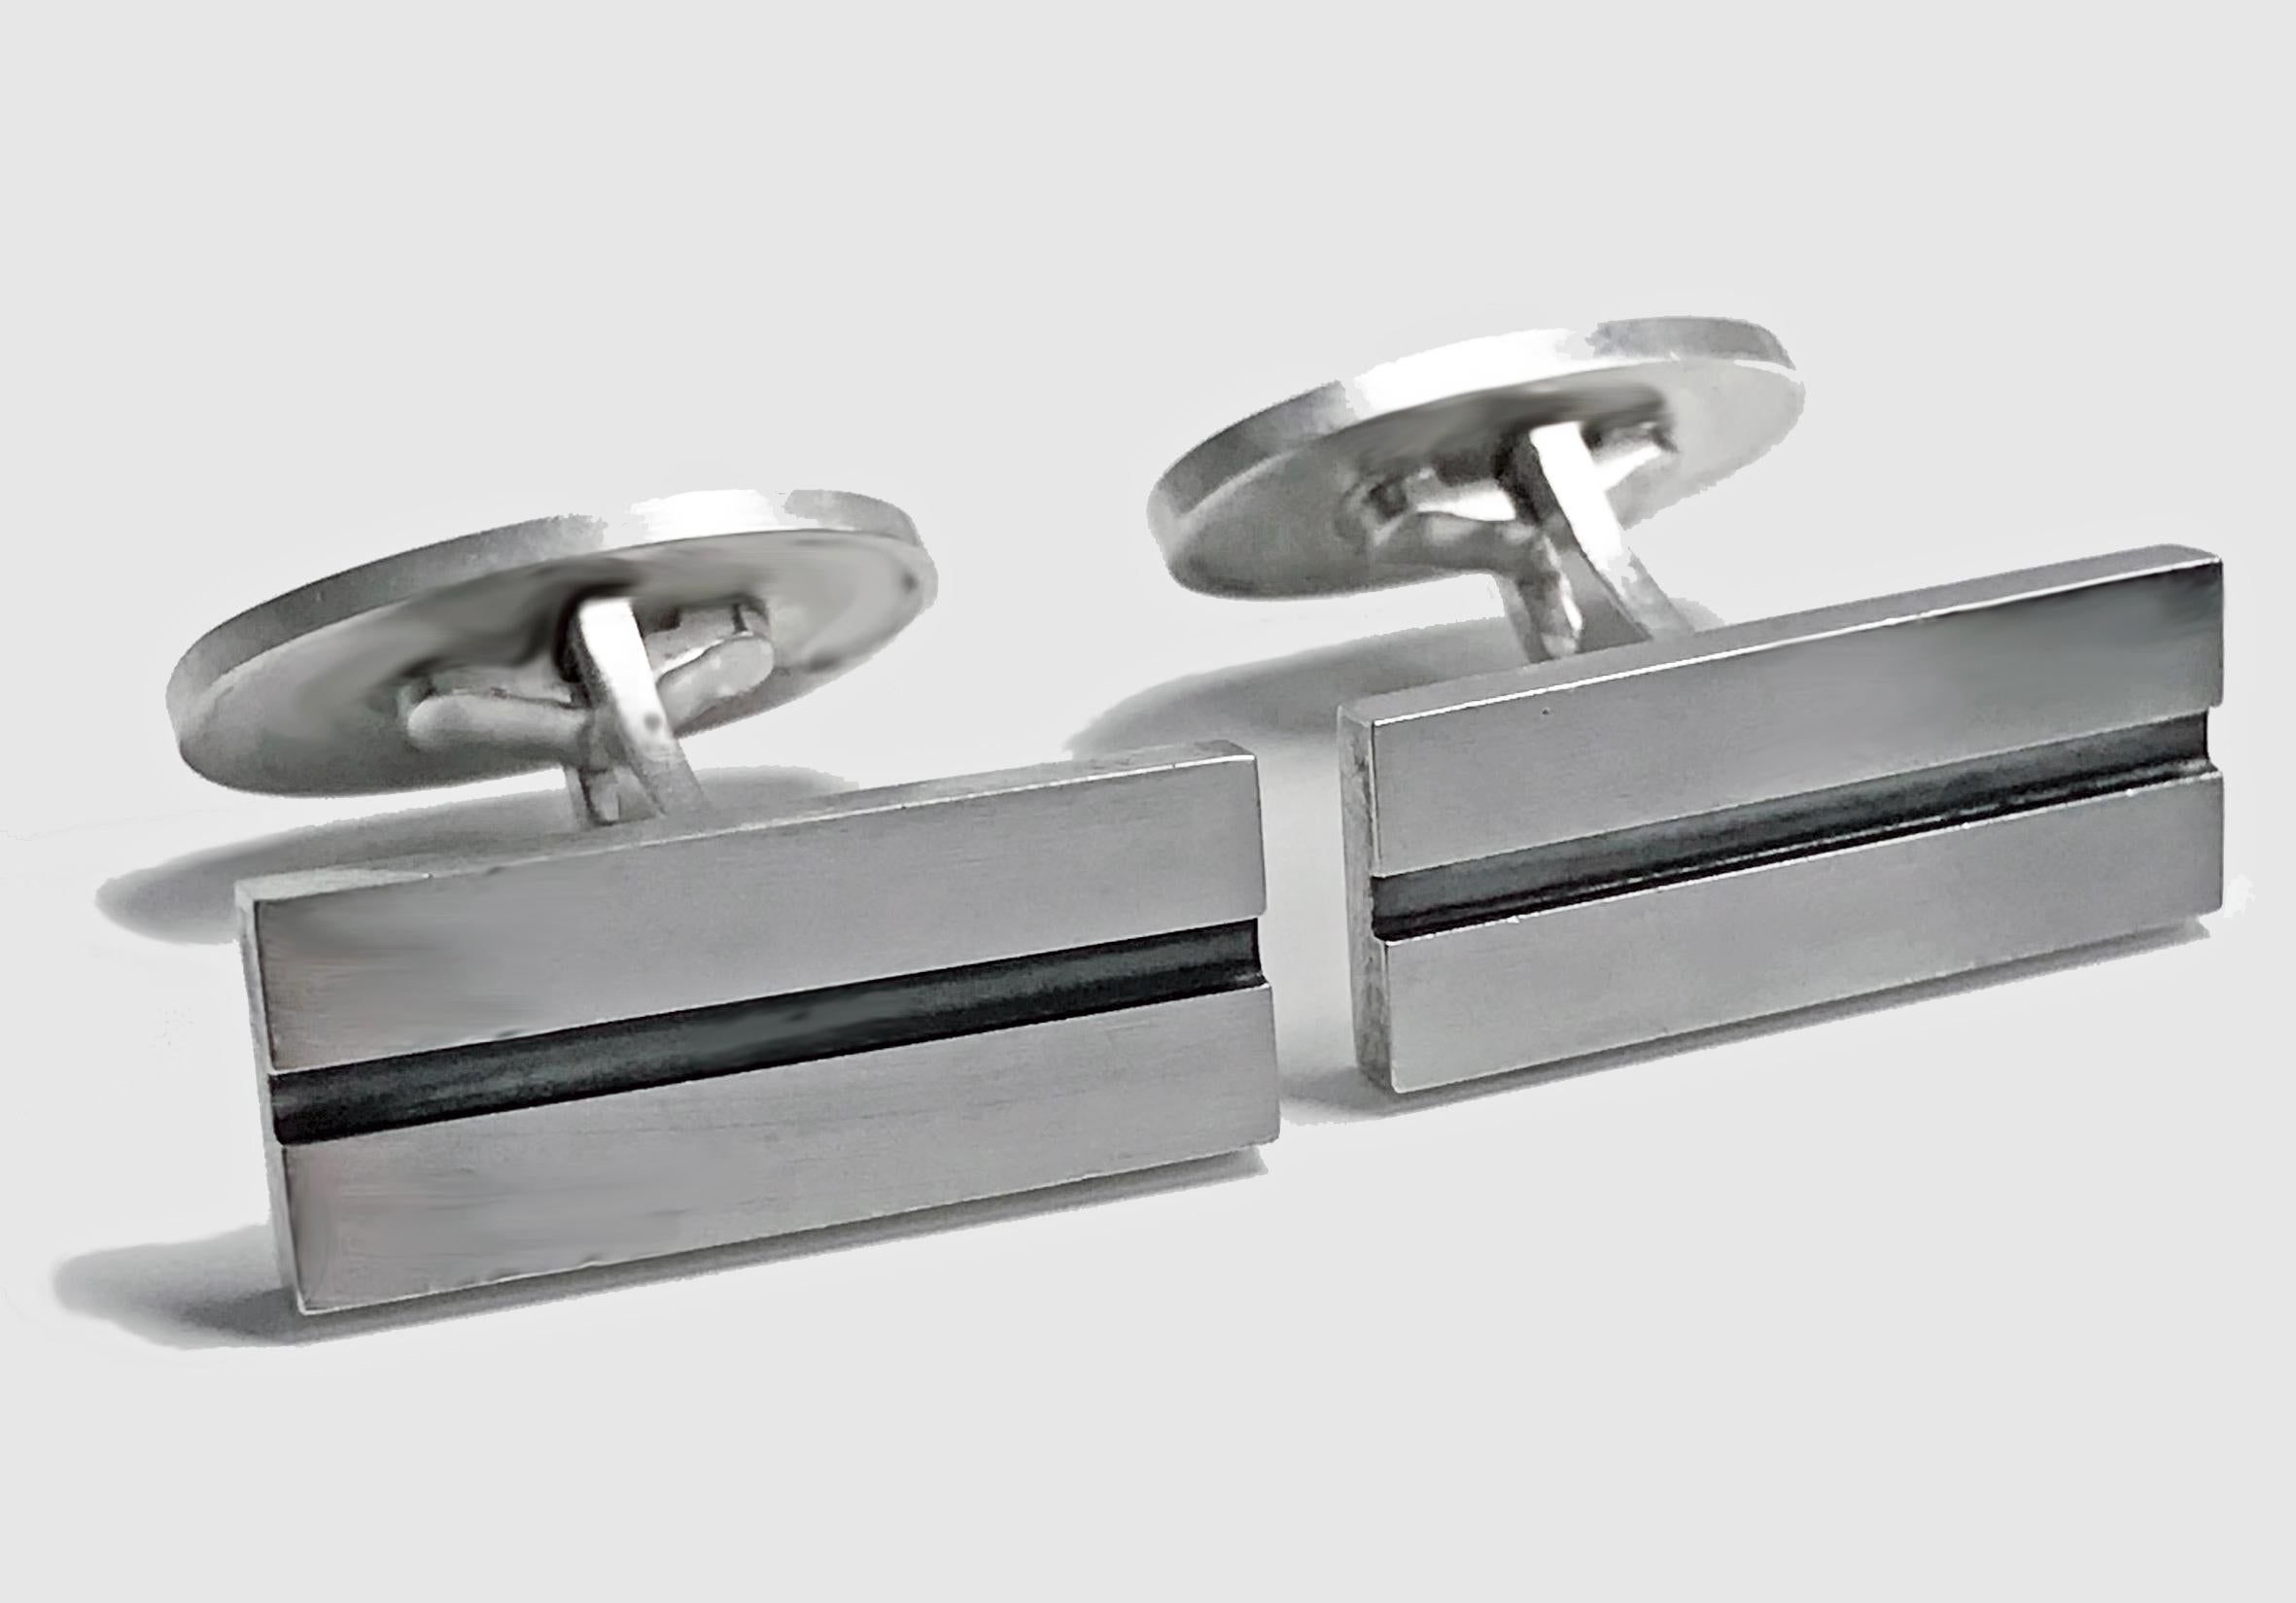 Georg Jensen Art Deco style Sterling Cufflinks No 114. Rectangular with central oxidized groove bar recessed., Hinged oval backs. Full Georg Jensen marks in oval dotted, 925 S Denmark and No 114. Front measures: 22 x 9 mm. Total Item Weight: 14.1